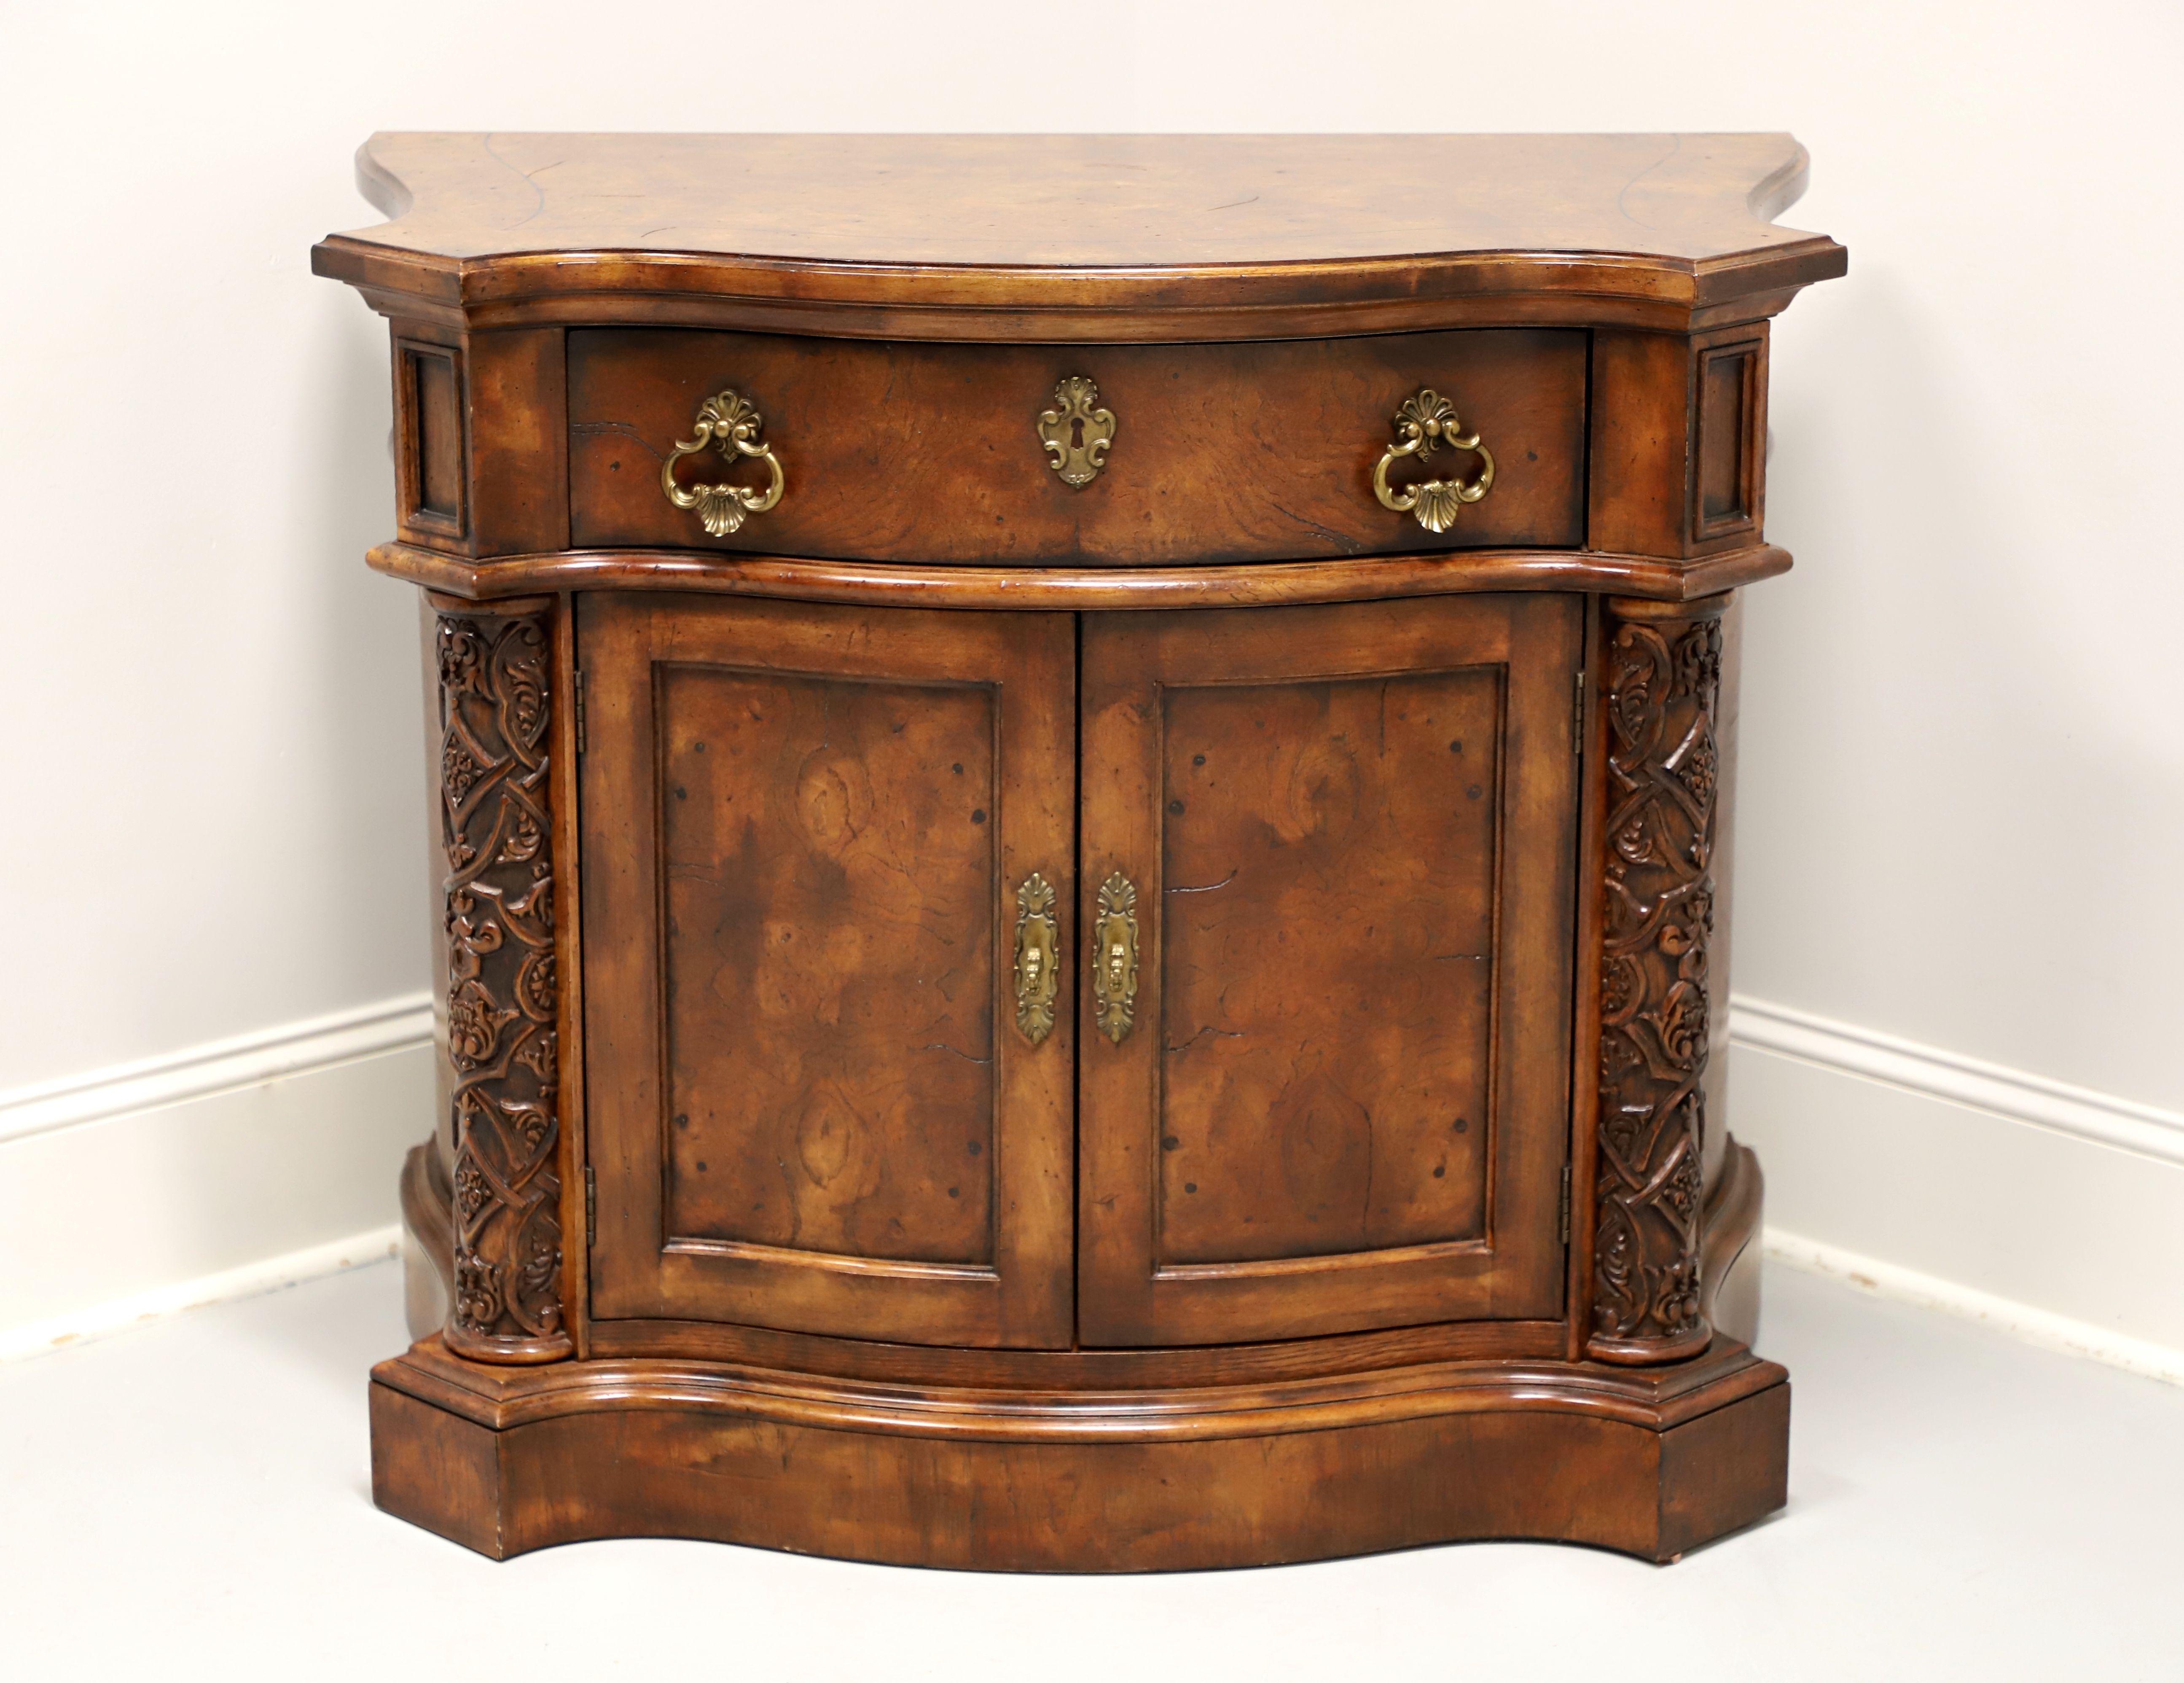 A Regency style commode cabinet by Henredon. Burl walnut with brass hardware; serpentine shape, bevel edge to top, protruded corners to front sides, elaborately carved columns at sides, and a solid base. Features one dovetail drawer with faux